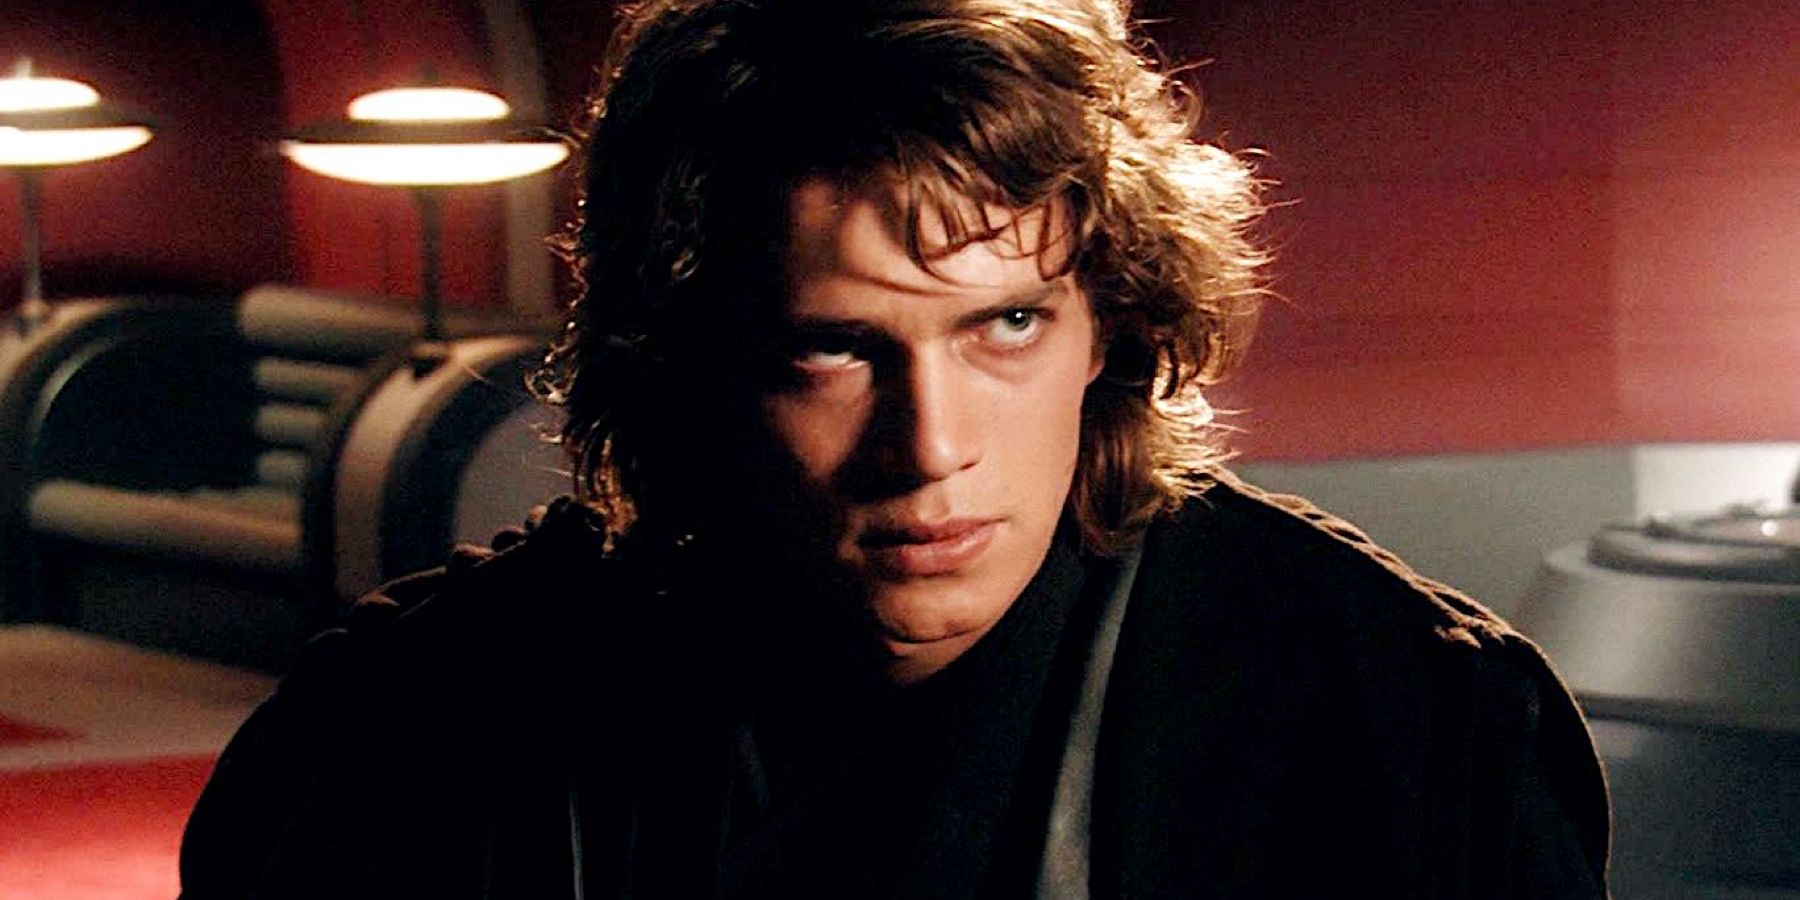 A distraught-looking Anakin Skywalker considers the consequences of his dark deeds in Star Wars: Episode III - Revenge of the Sith.